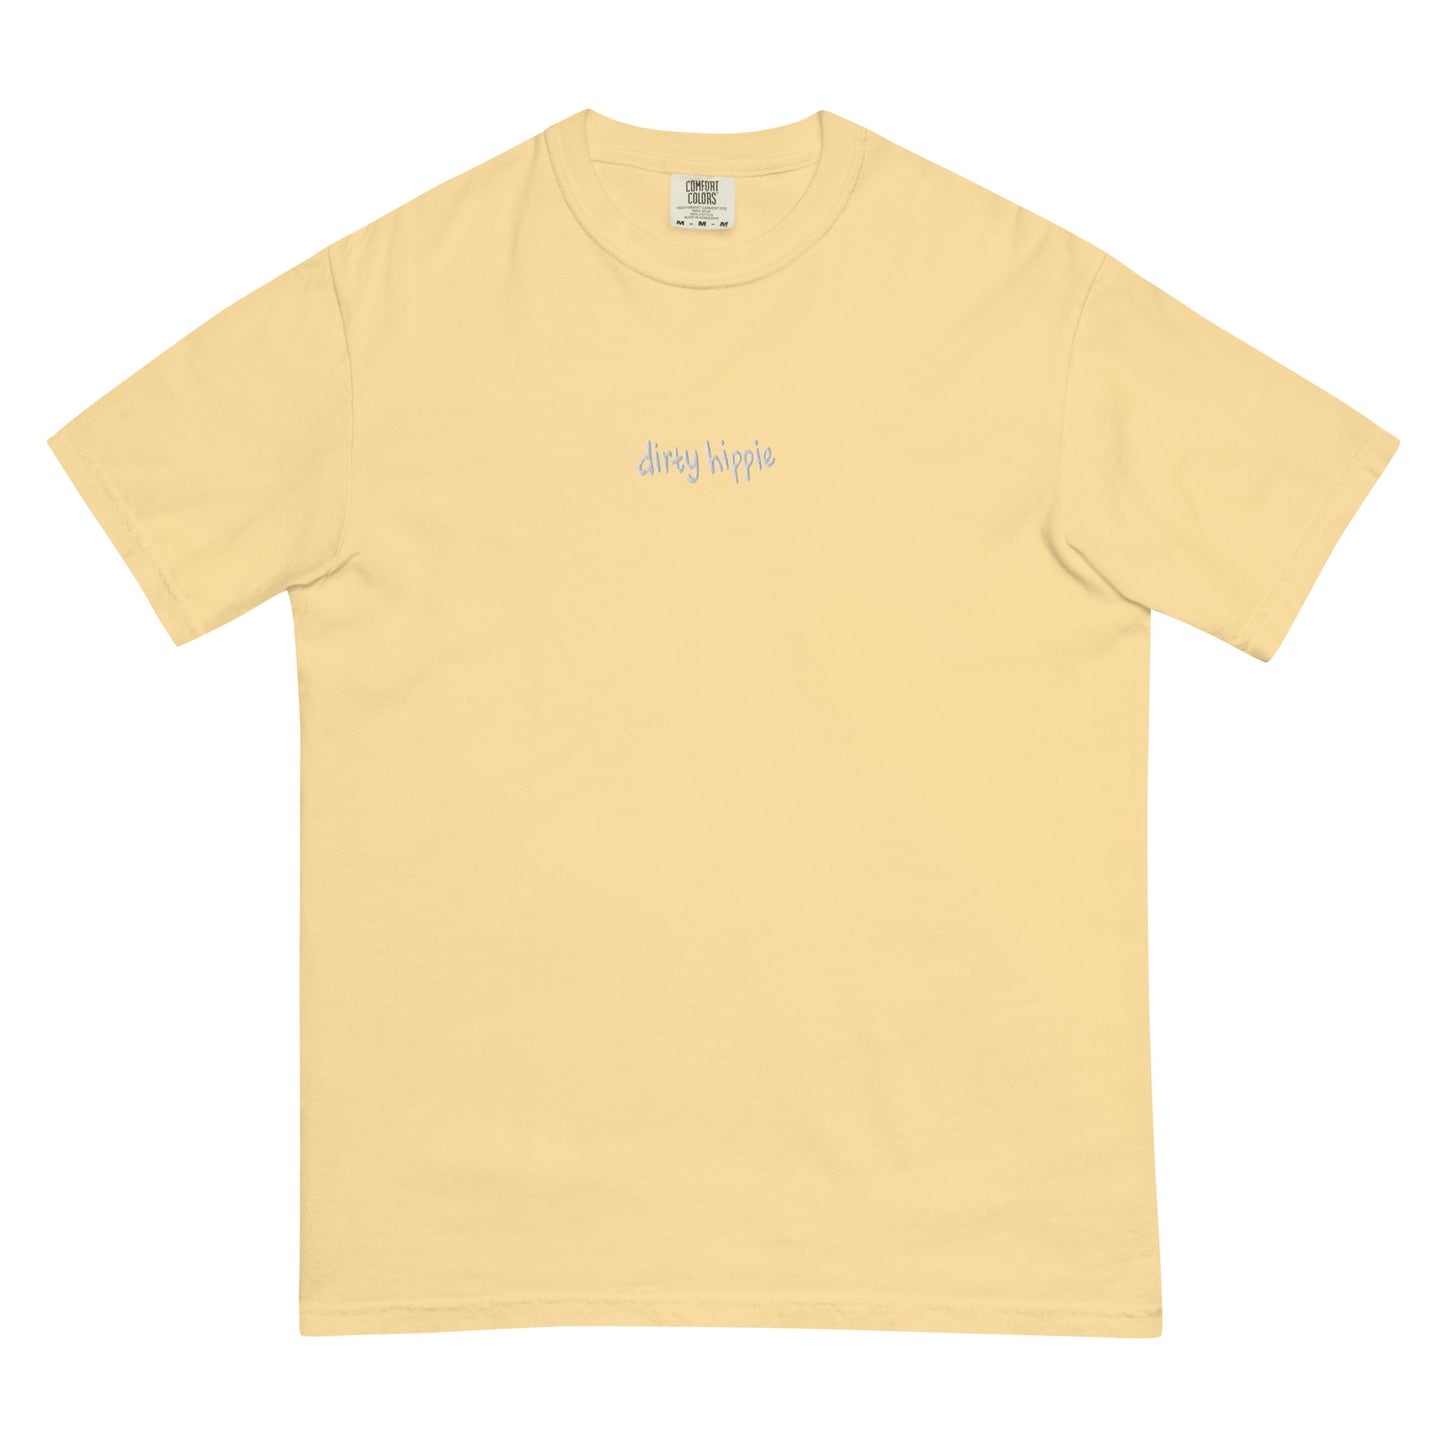 dirty hippie embroidered garment-dyed heavyweight t-shirt